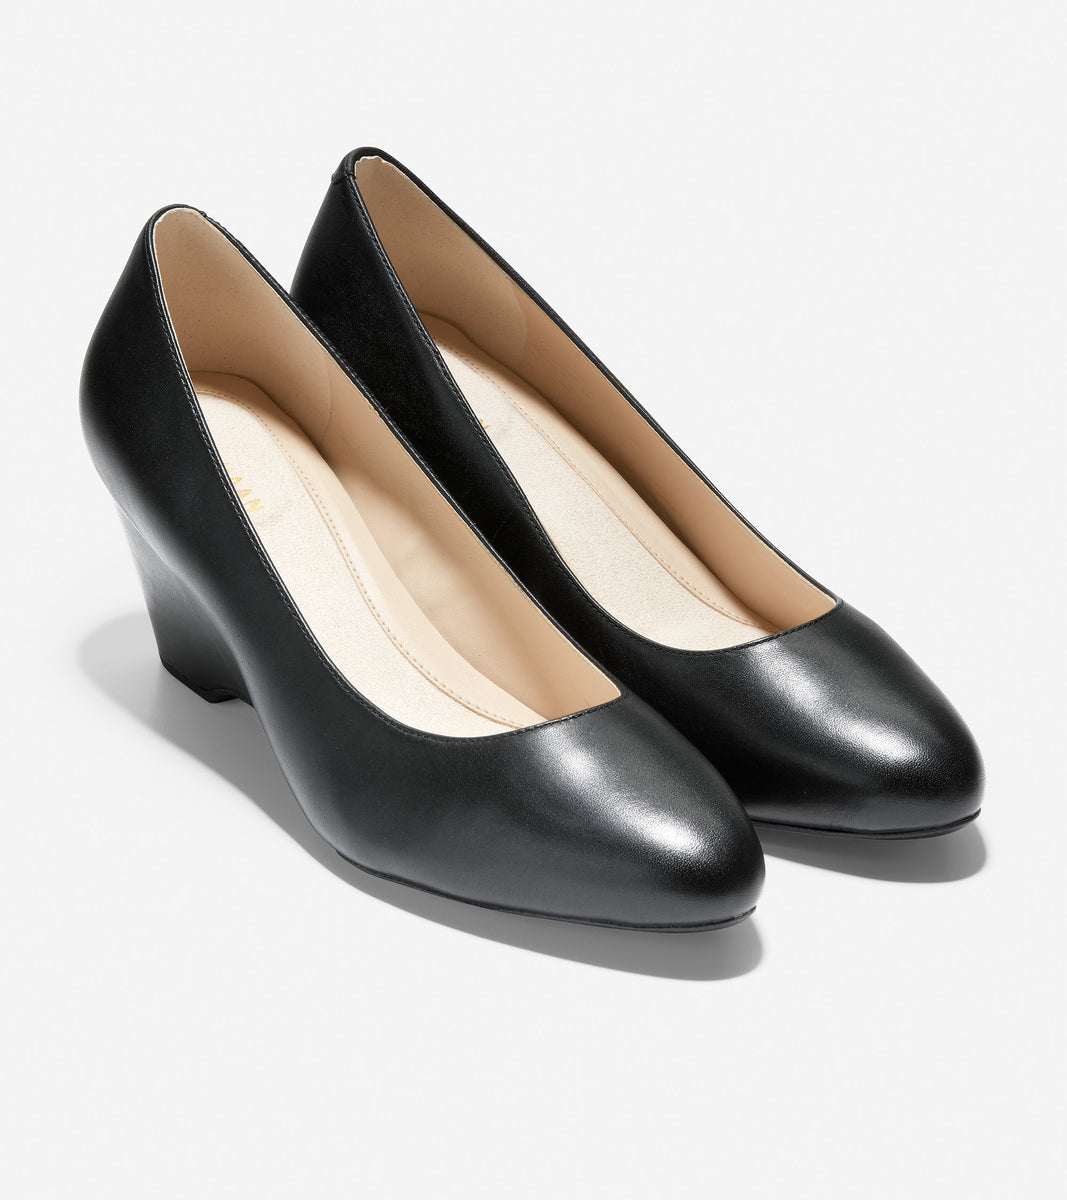 ColeHaan-The Go-To Wedge-w17526-Black Leather